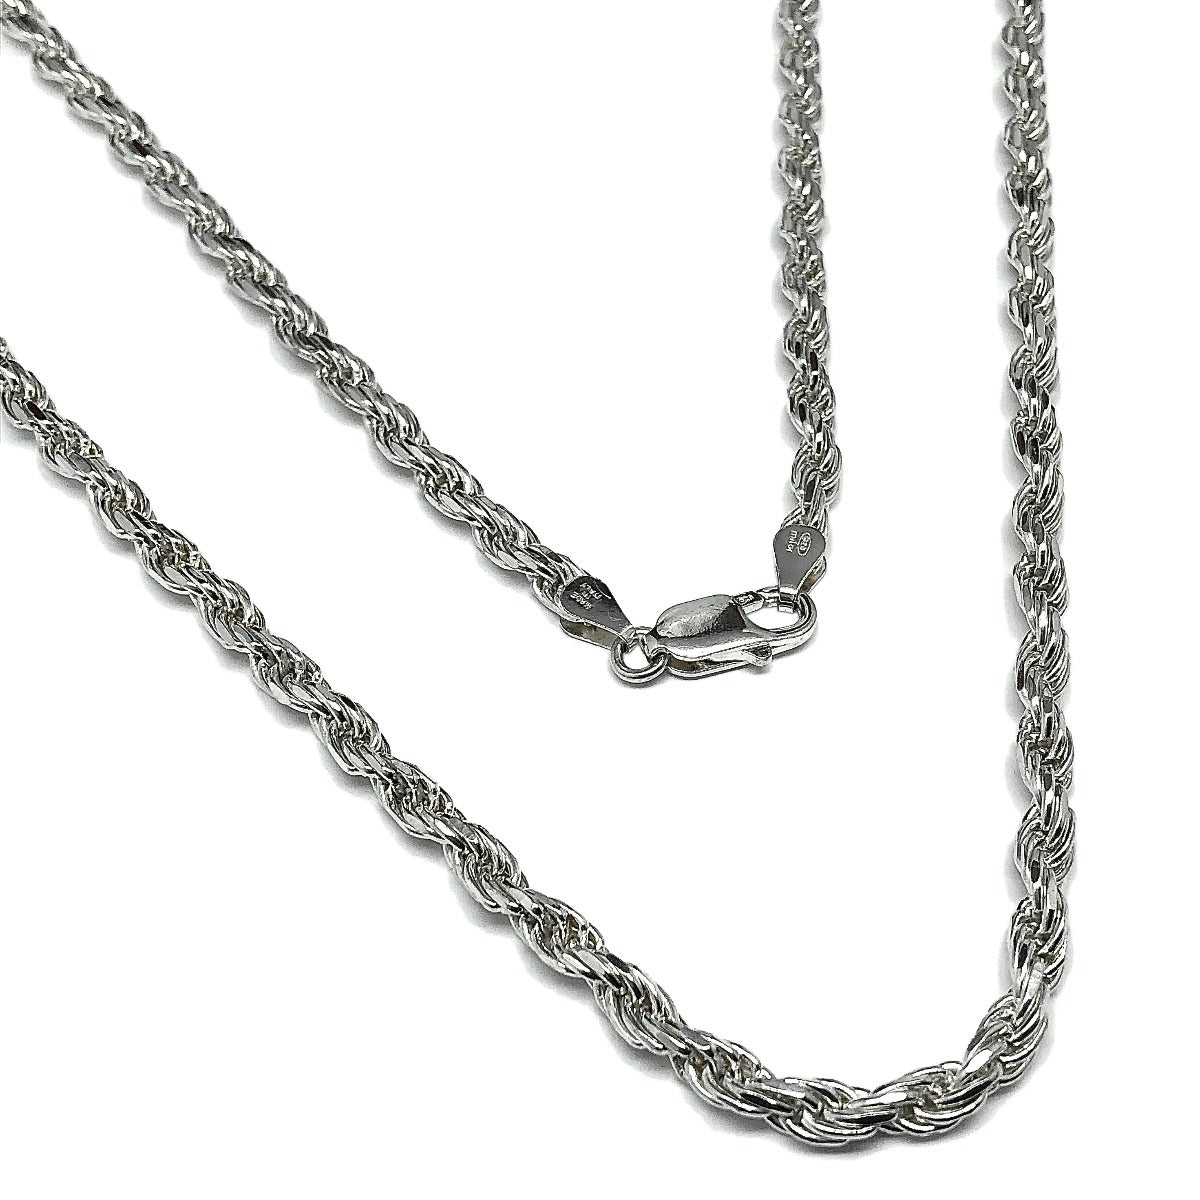 Chain Necklace 26in Sterling Silver 4.5mm Solid Rope Chain Necklace